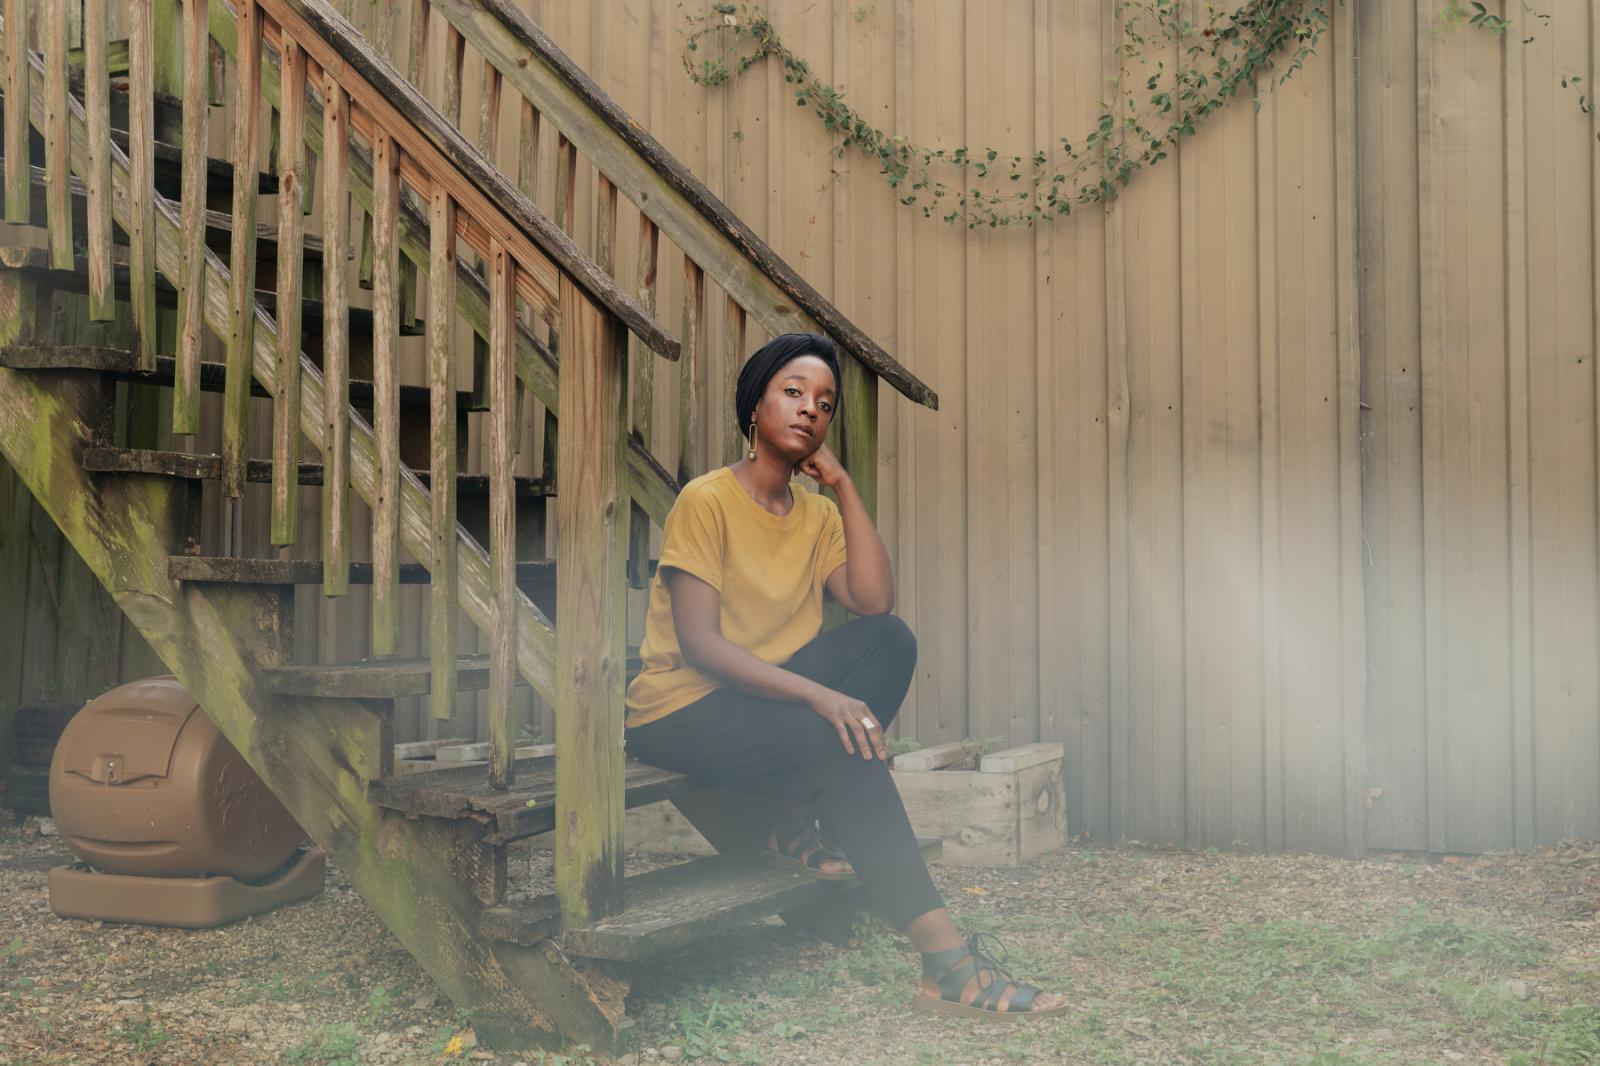 Herbalist and kindergarten teacher Nikki Minor, 33, at her home in New Orleans, Louisiana on March 26, 2020. (Annie Flanagan for The New York Times)